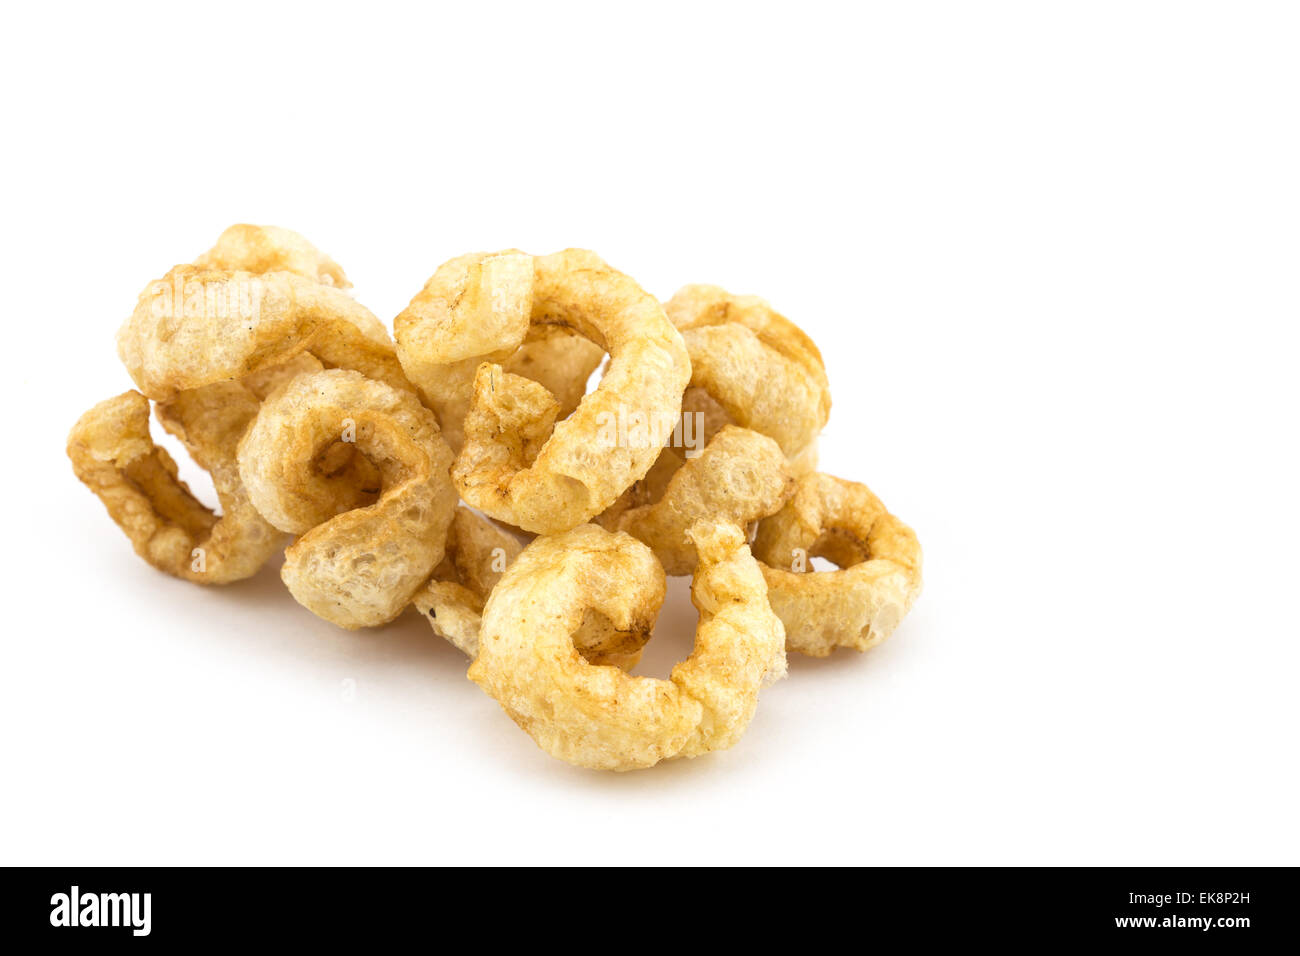 Pork snack, Tha ifood isolated on white background Stock Photo